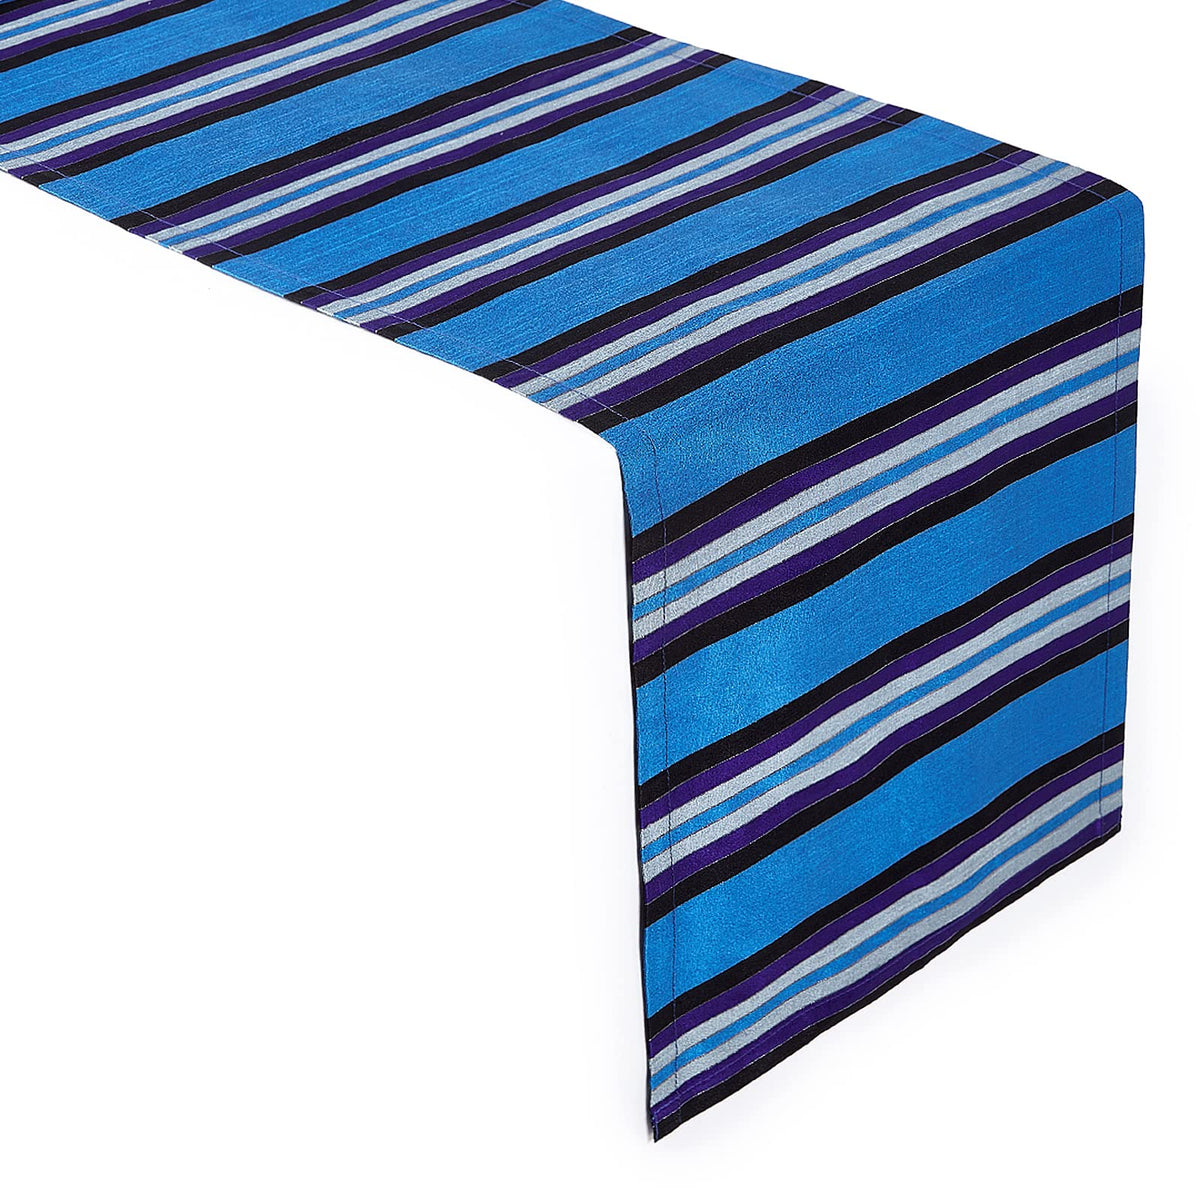 Encasa Table Runner, Poly-Silk Dupion with Fancy Stripes, 4 Seater Dining Table of Size (32x150 cm13 x59), Decorative Cloth for Party, Home, Cafes, Hotels - Washable - Coffee Stripes